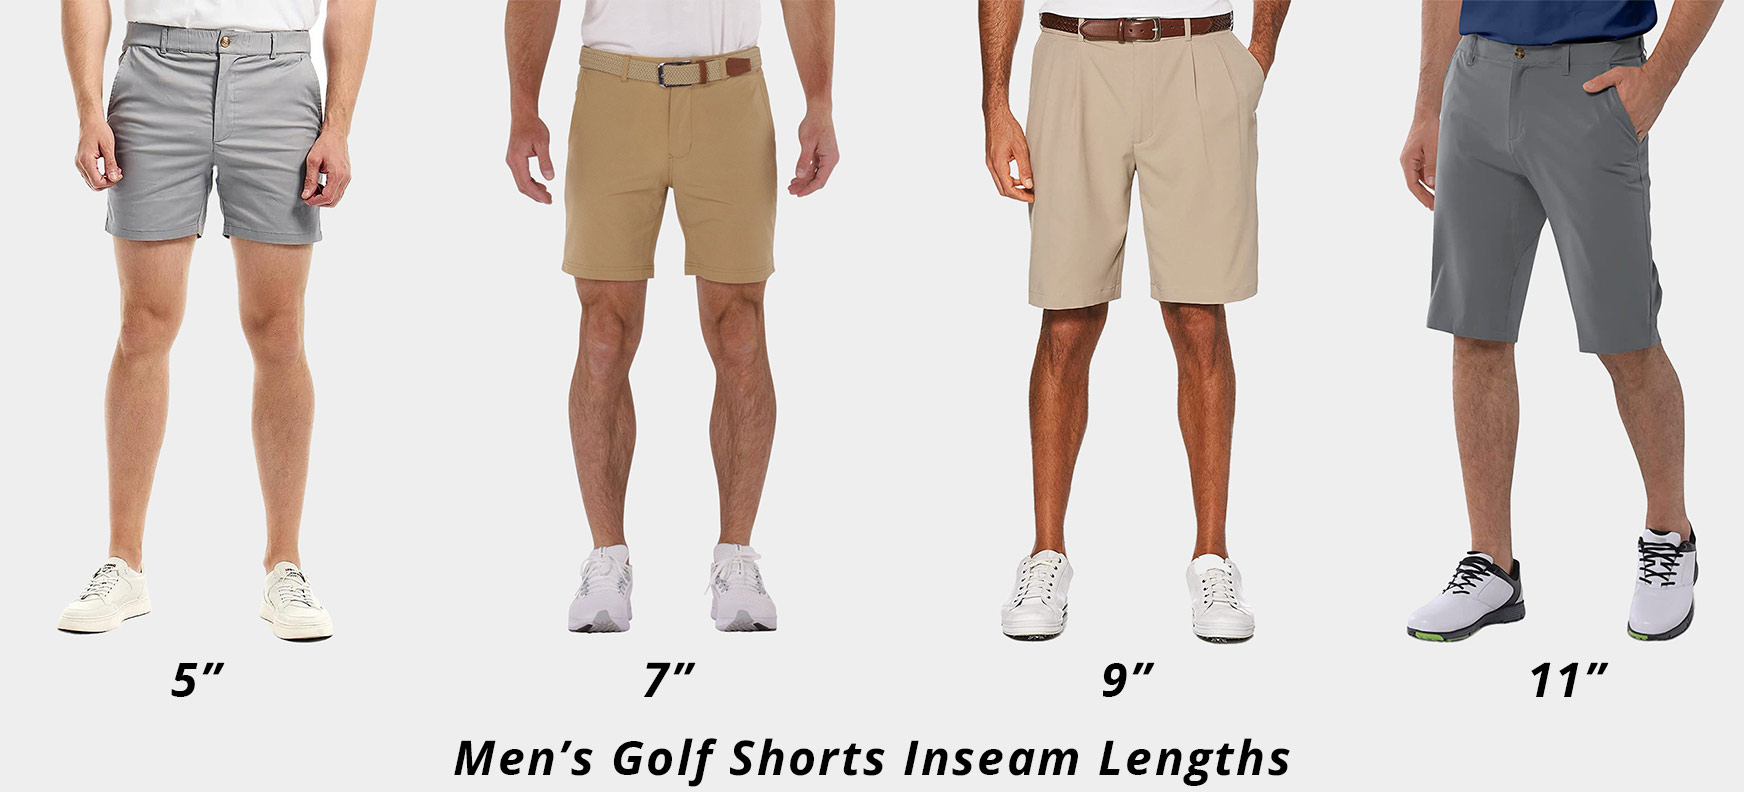 What is the Best Length for Golf Shorts? - Business Community Article ...